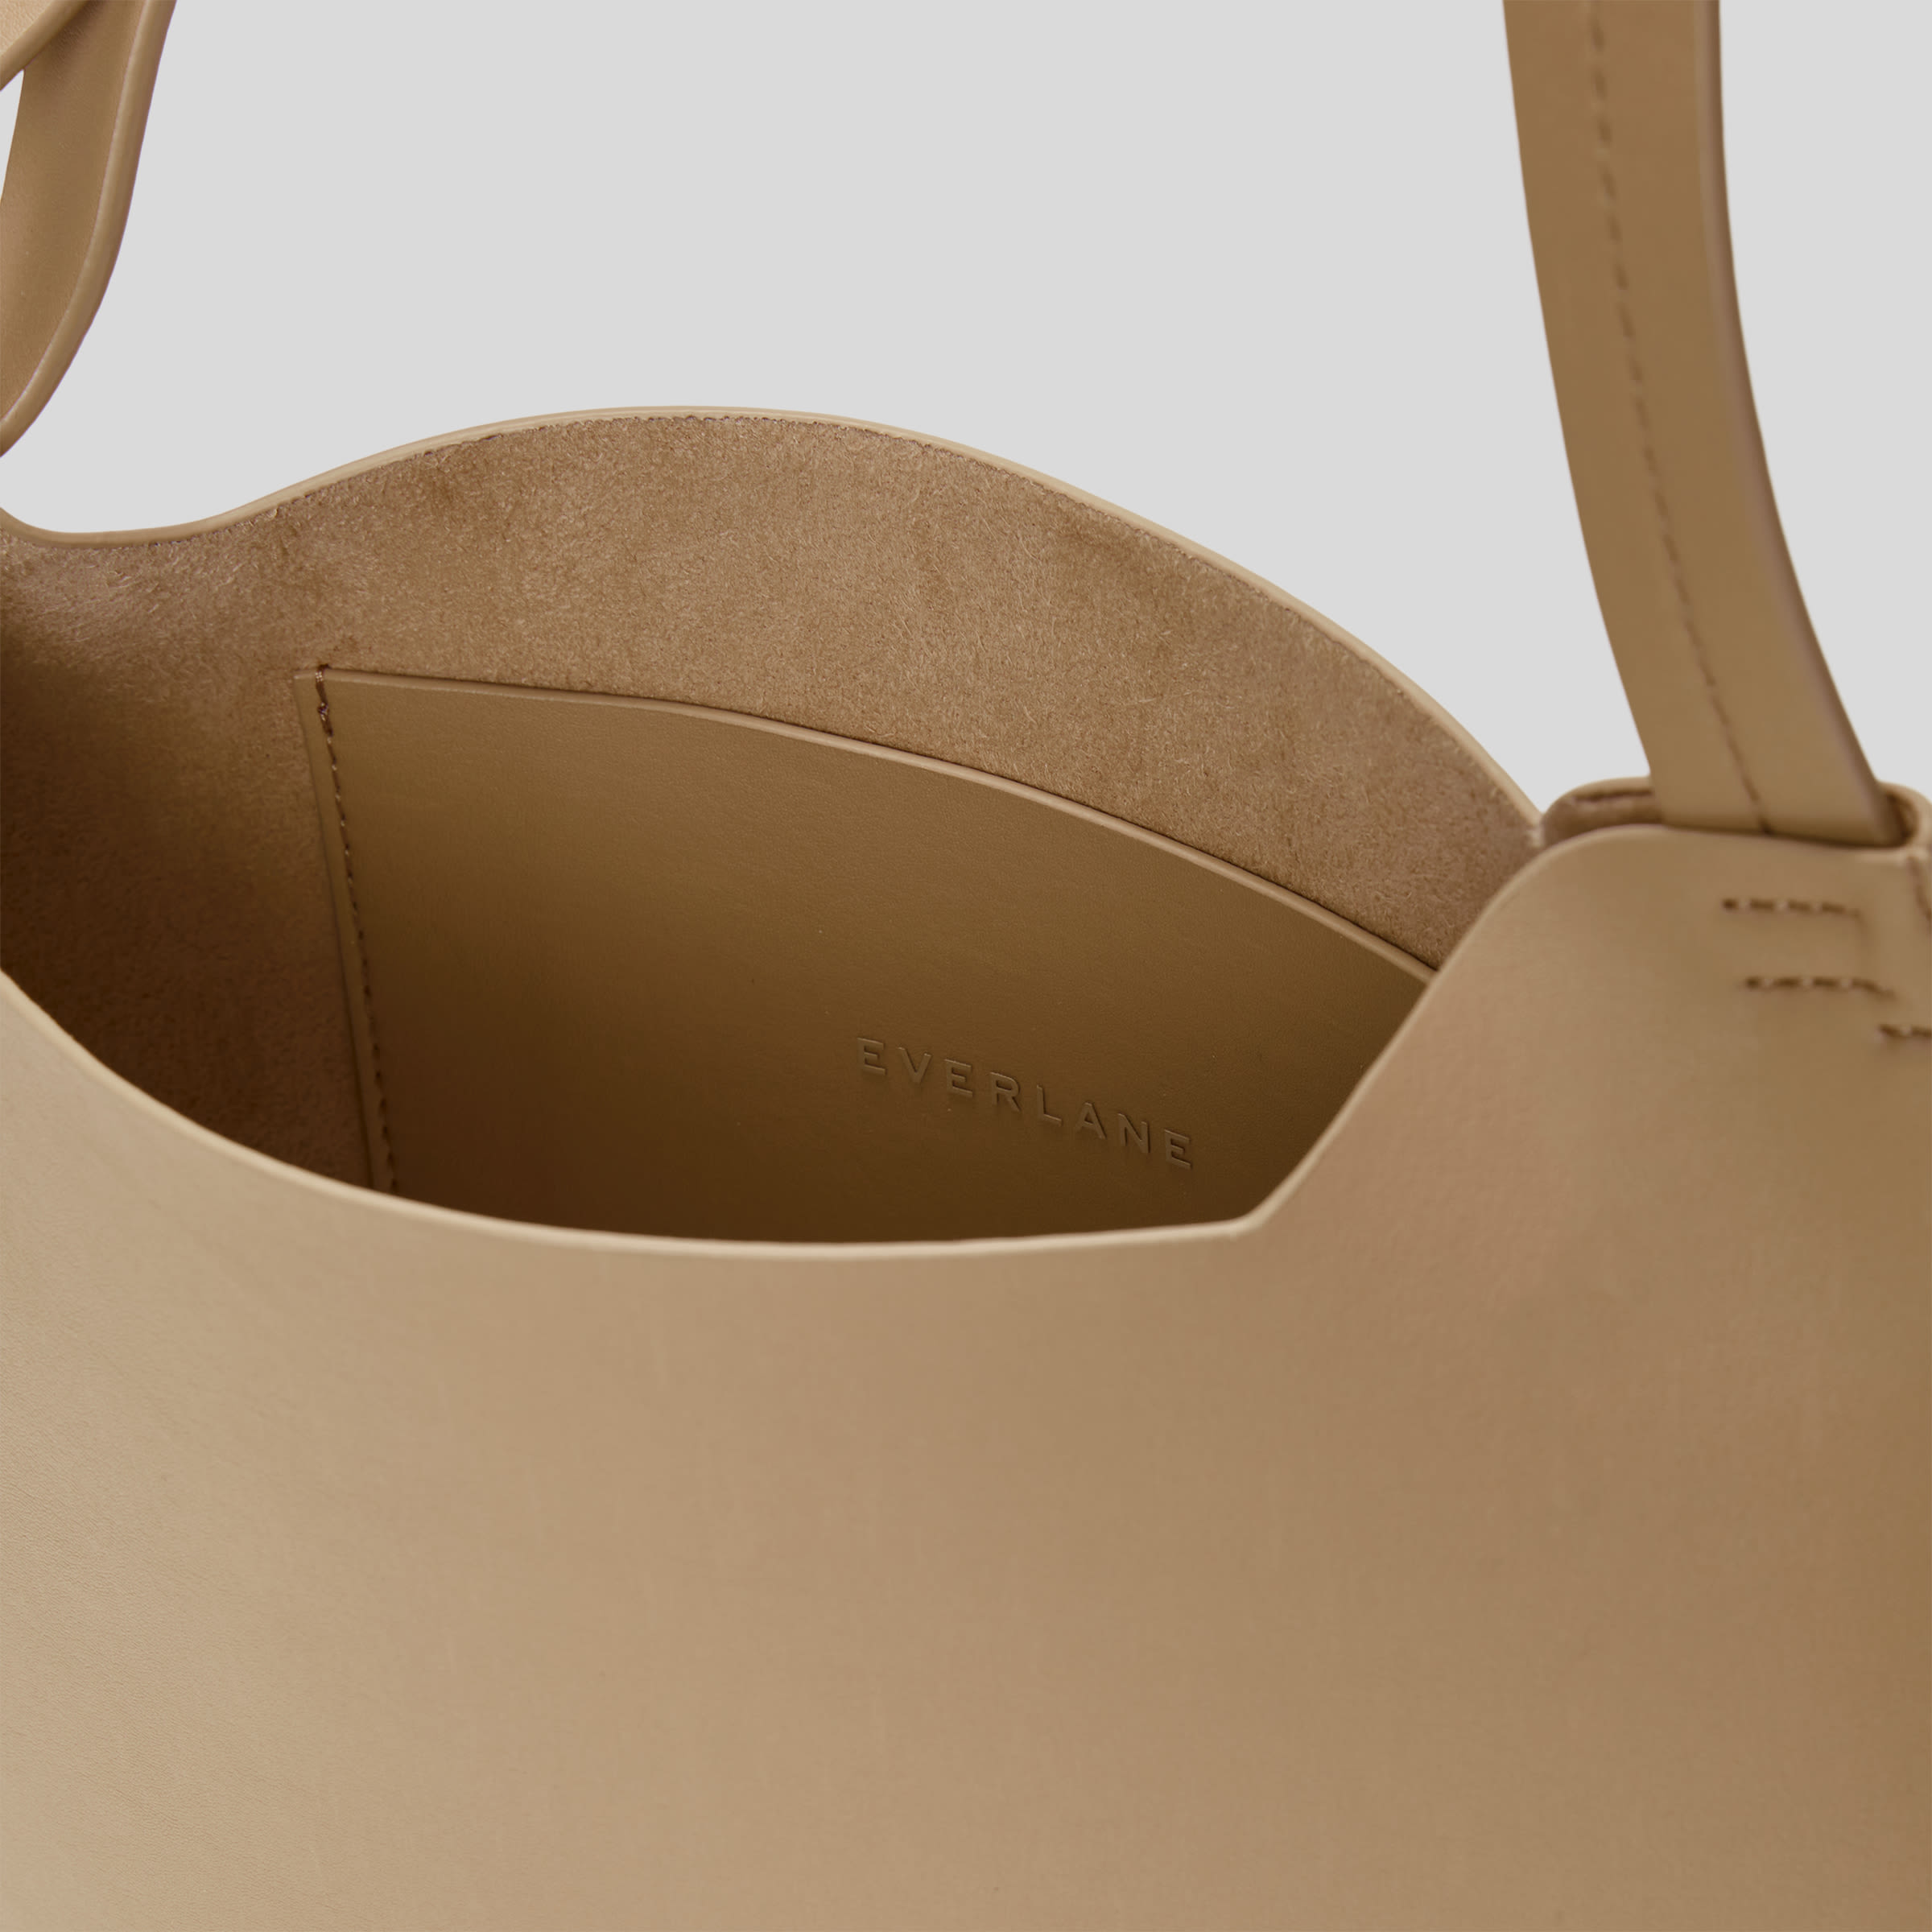 Review: Is Everlane's Cactus Leather Hobo bag worth $228?